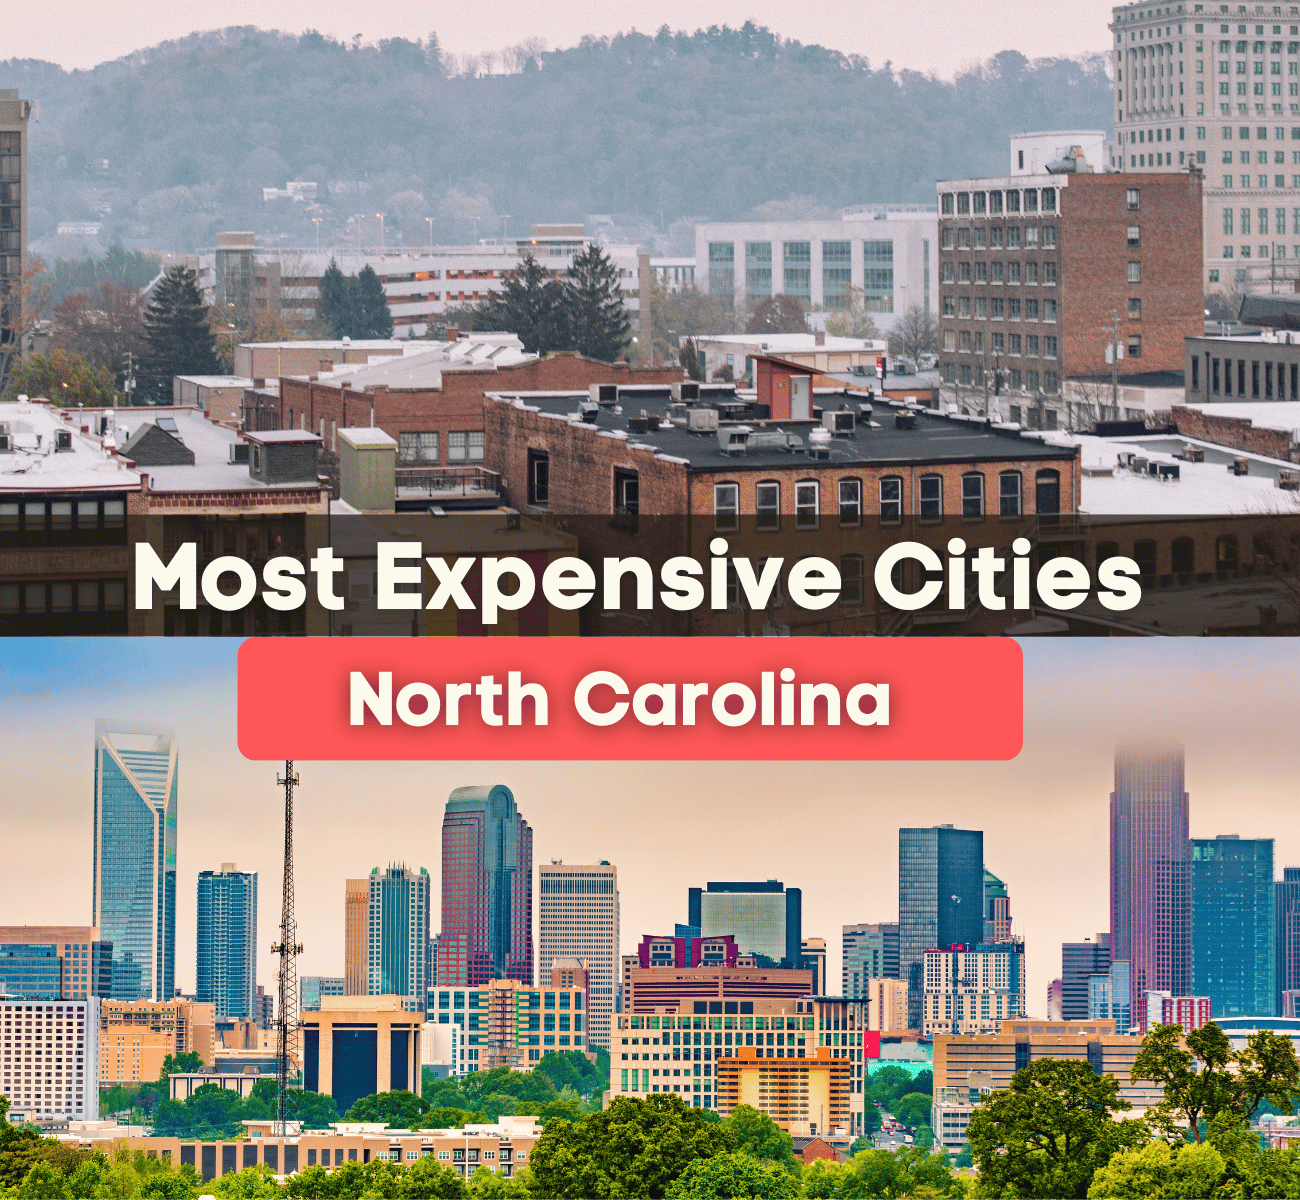 7 Most Expensive Cities in North Carolina